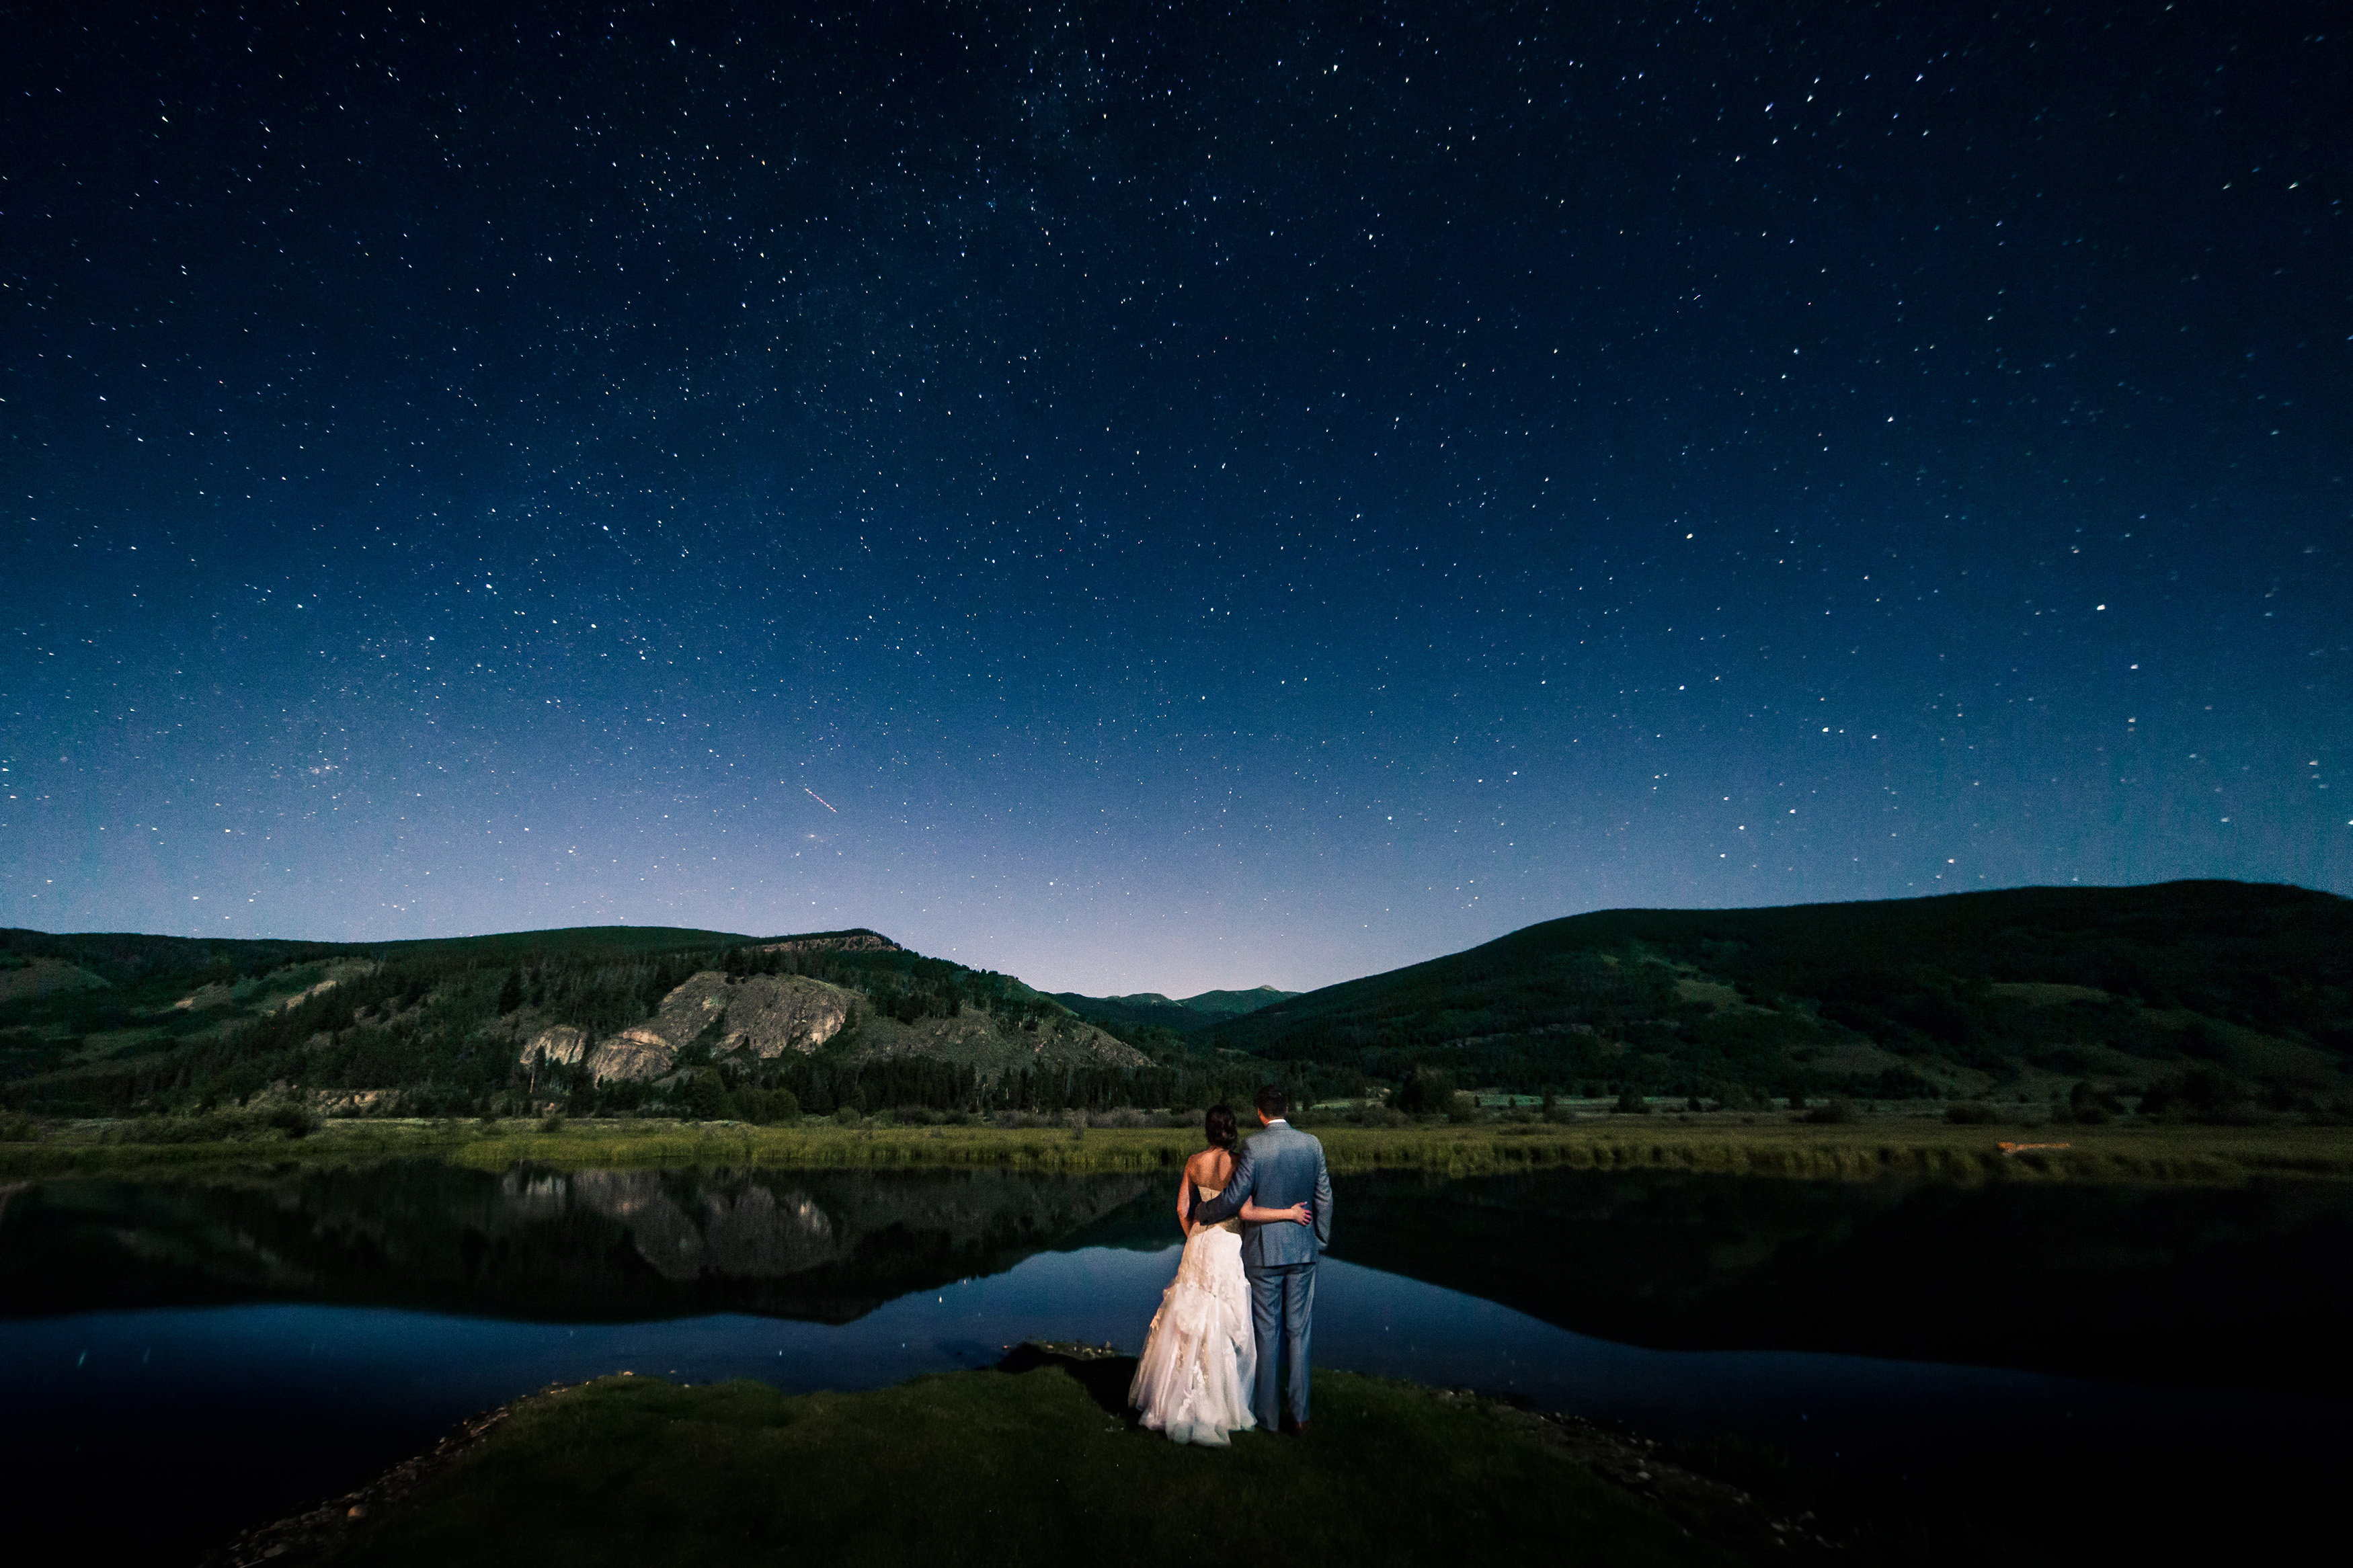 Starlight Wedding Photo at Camp Hale in Redcliff, CO